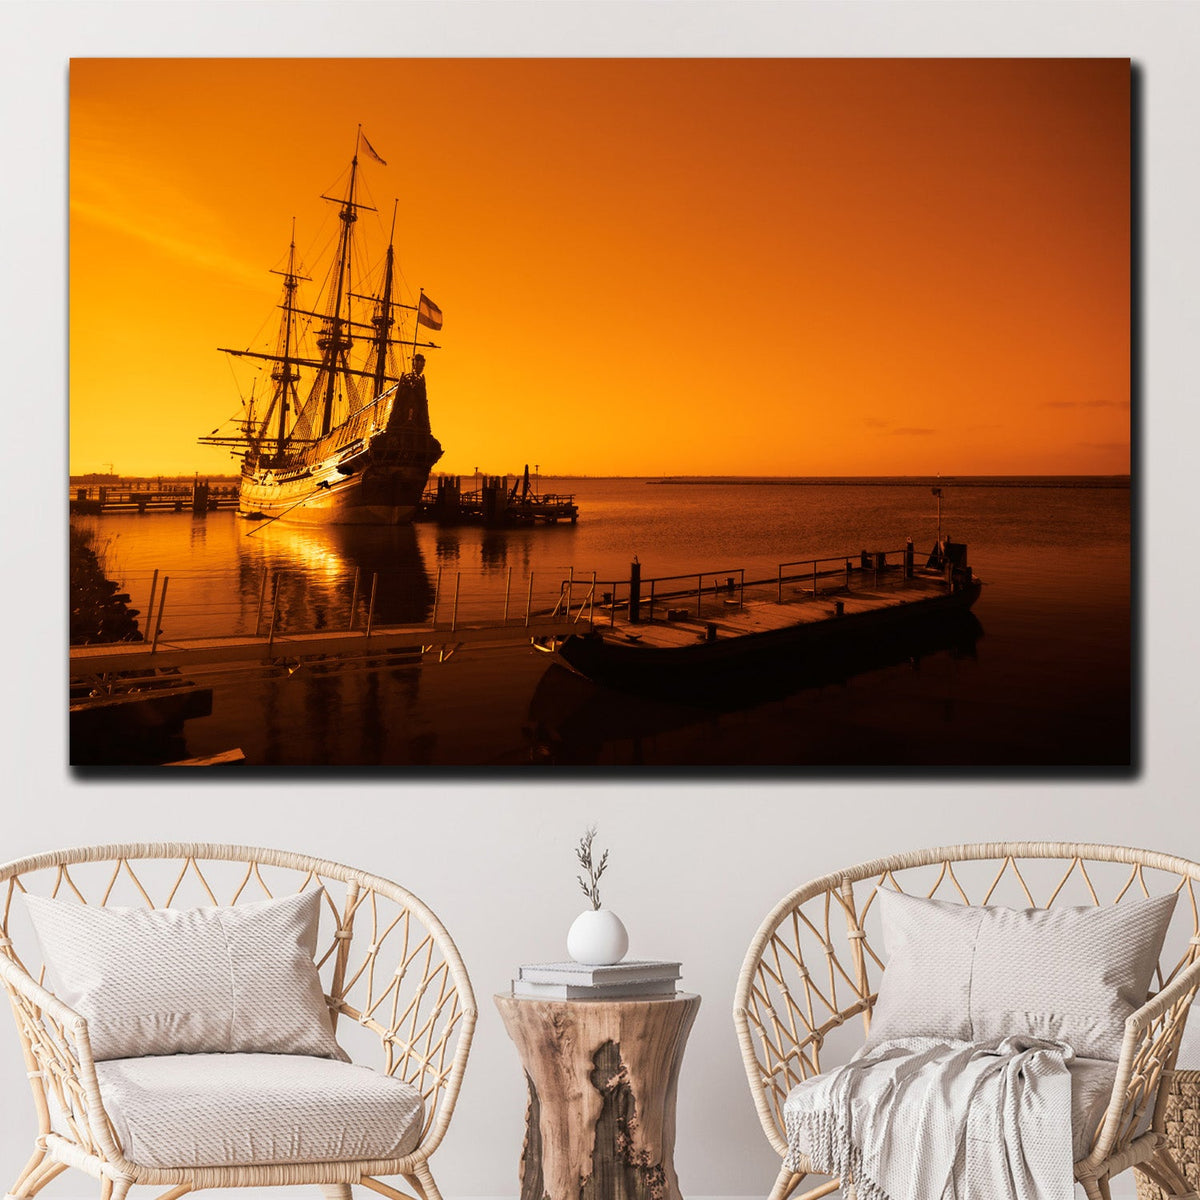 https://cdn.shopify.com/s/files/1/0387/9986/8044/products/ShipintheQuayCanvasArtprintStretched-3.jpg